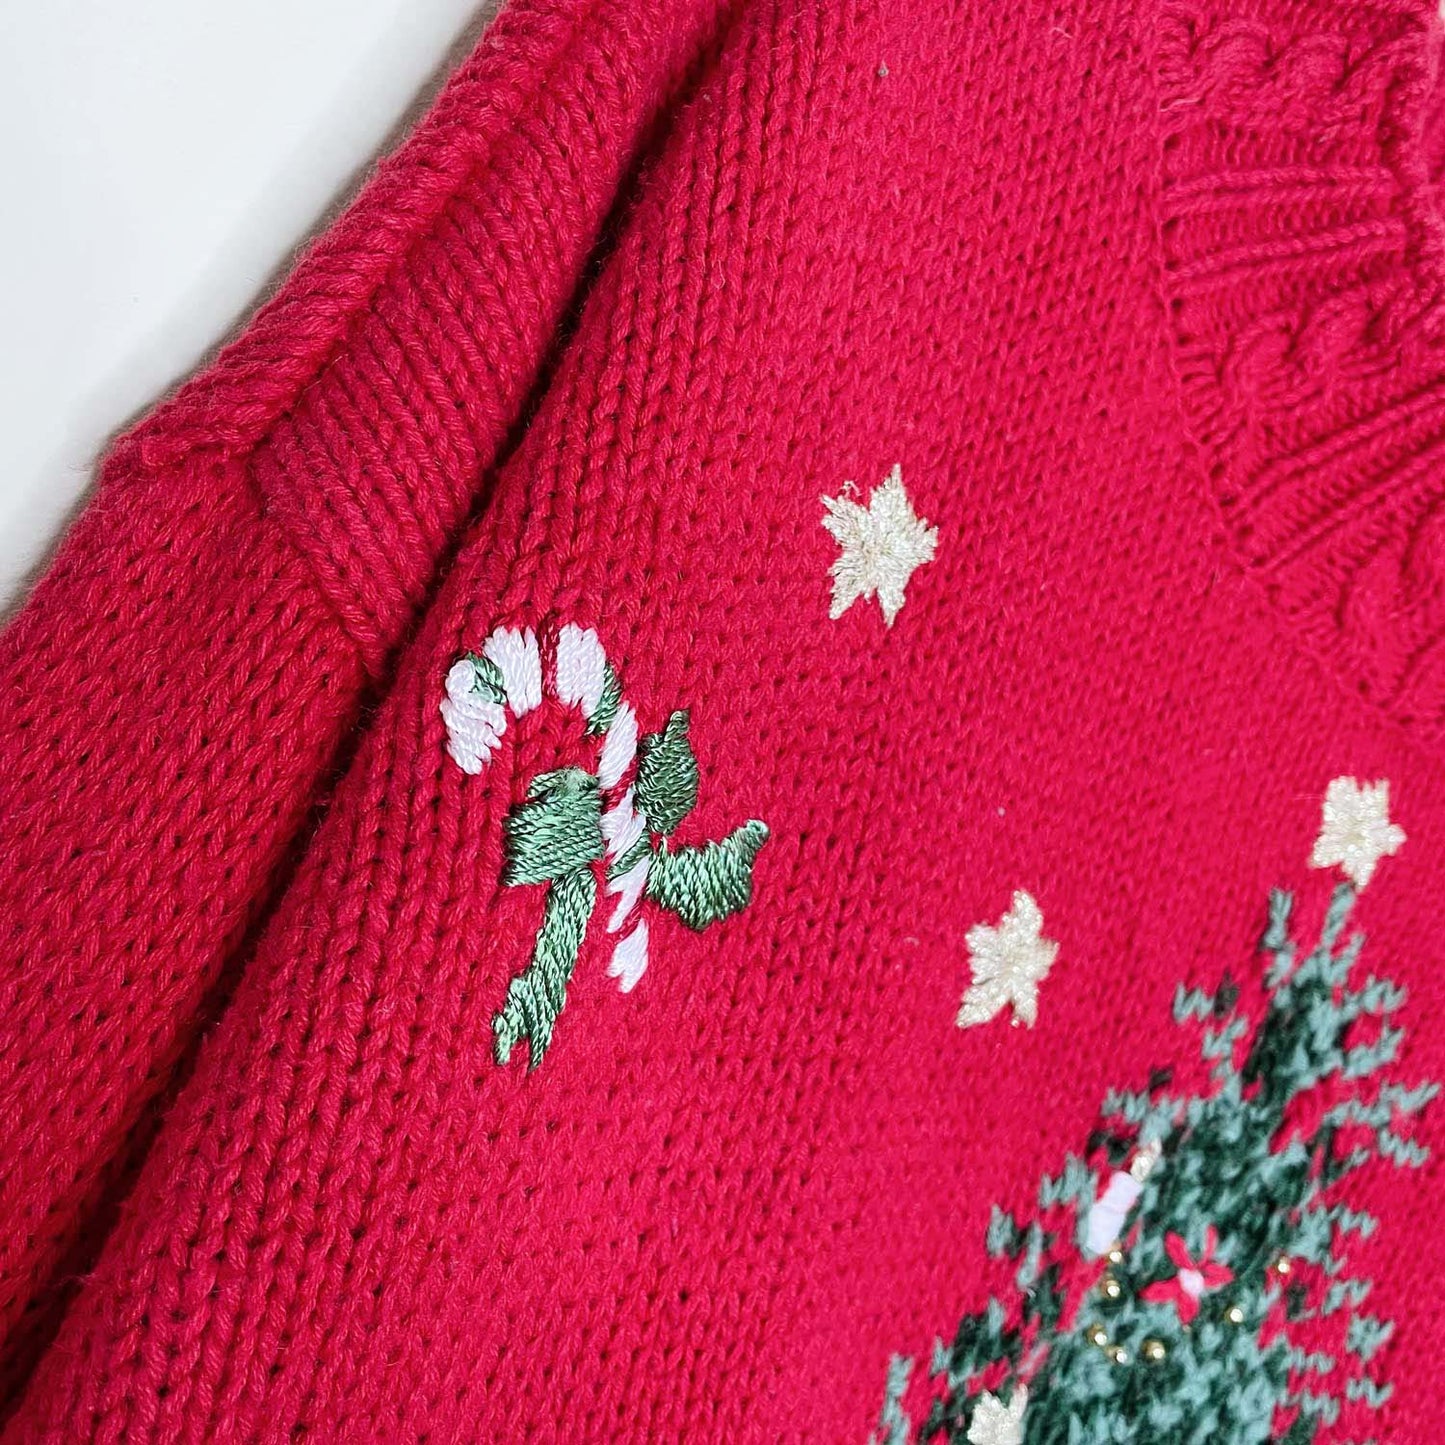 vintage episcia holiday tree and bears knitted sweater - size large